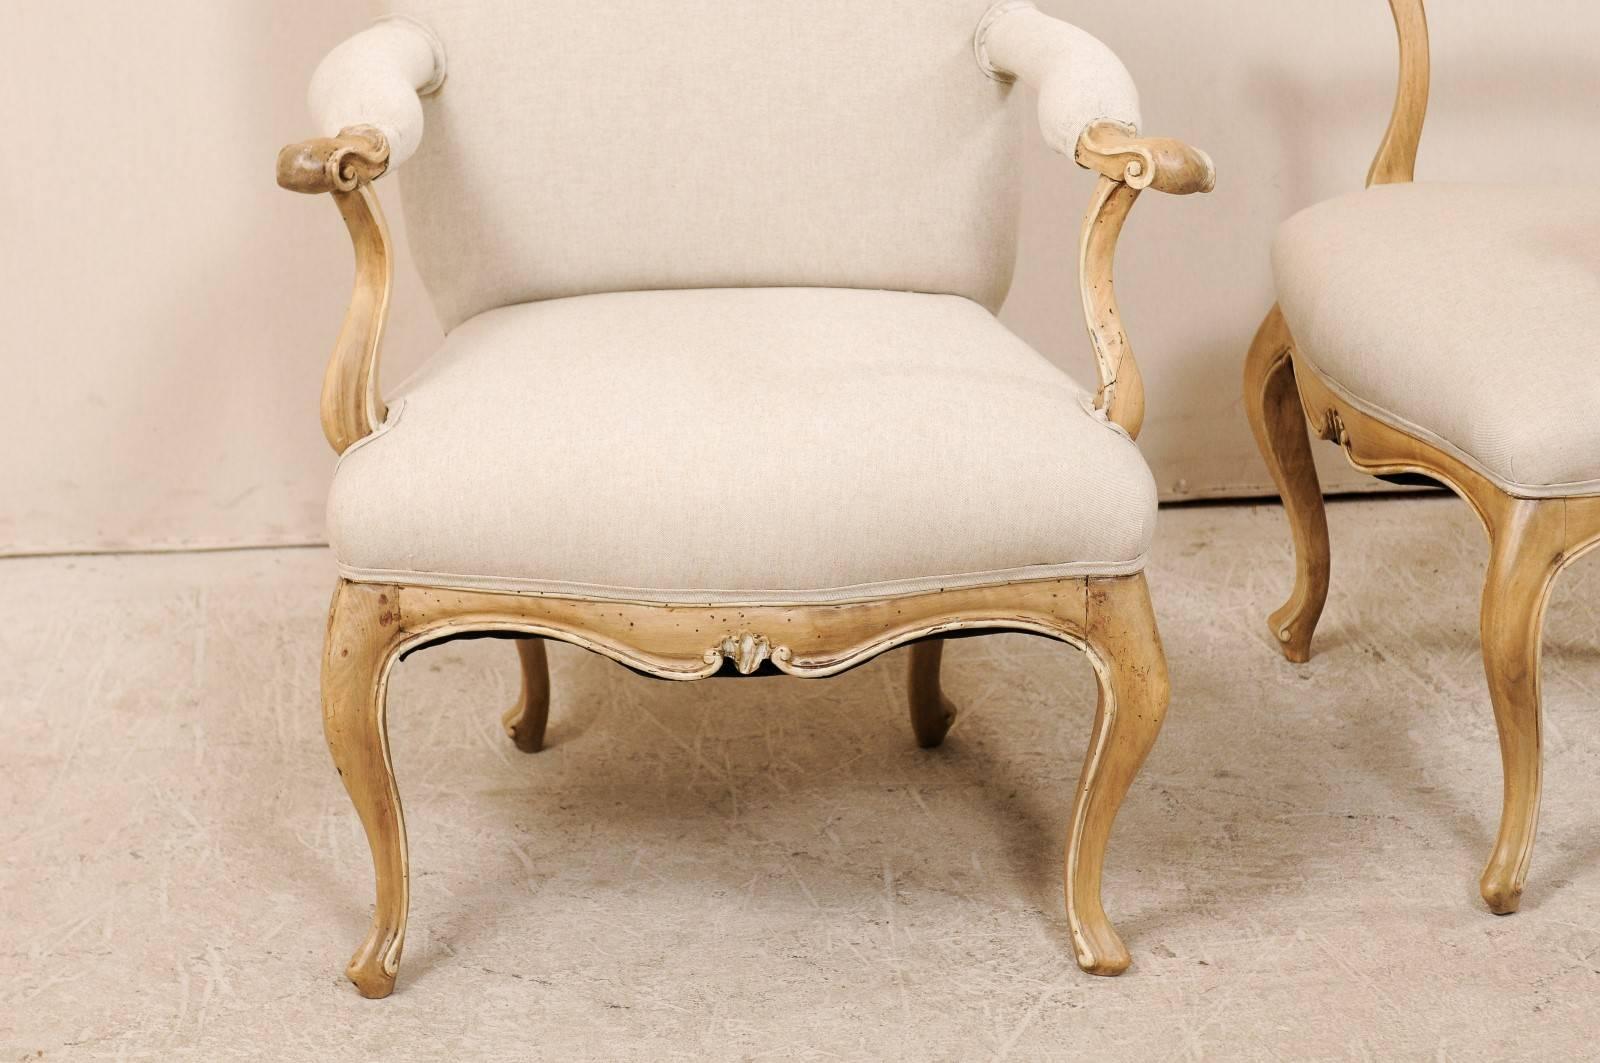 Pair of Lovely 19th Century Italian Upholstered Armchairs with Cabriole Legs For Sale 5